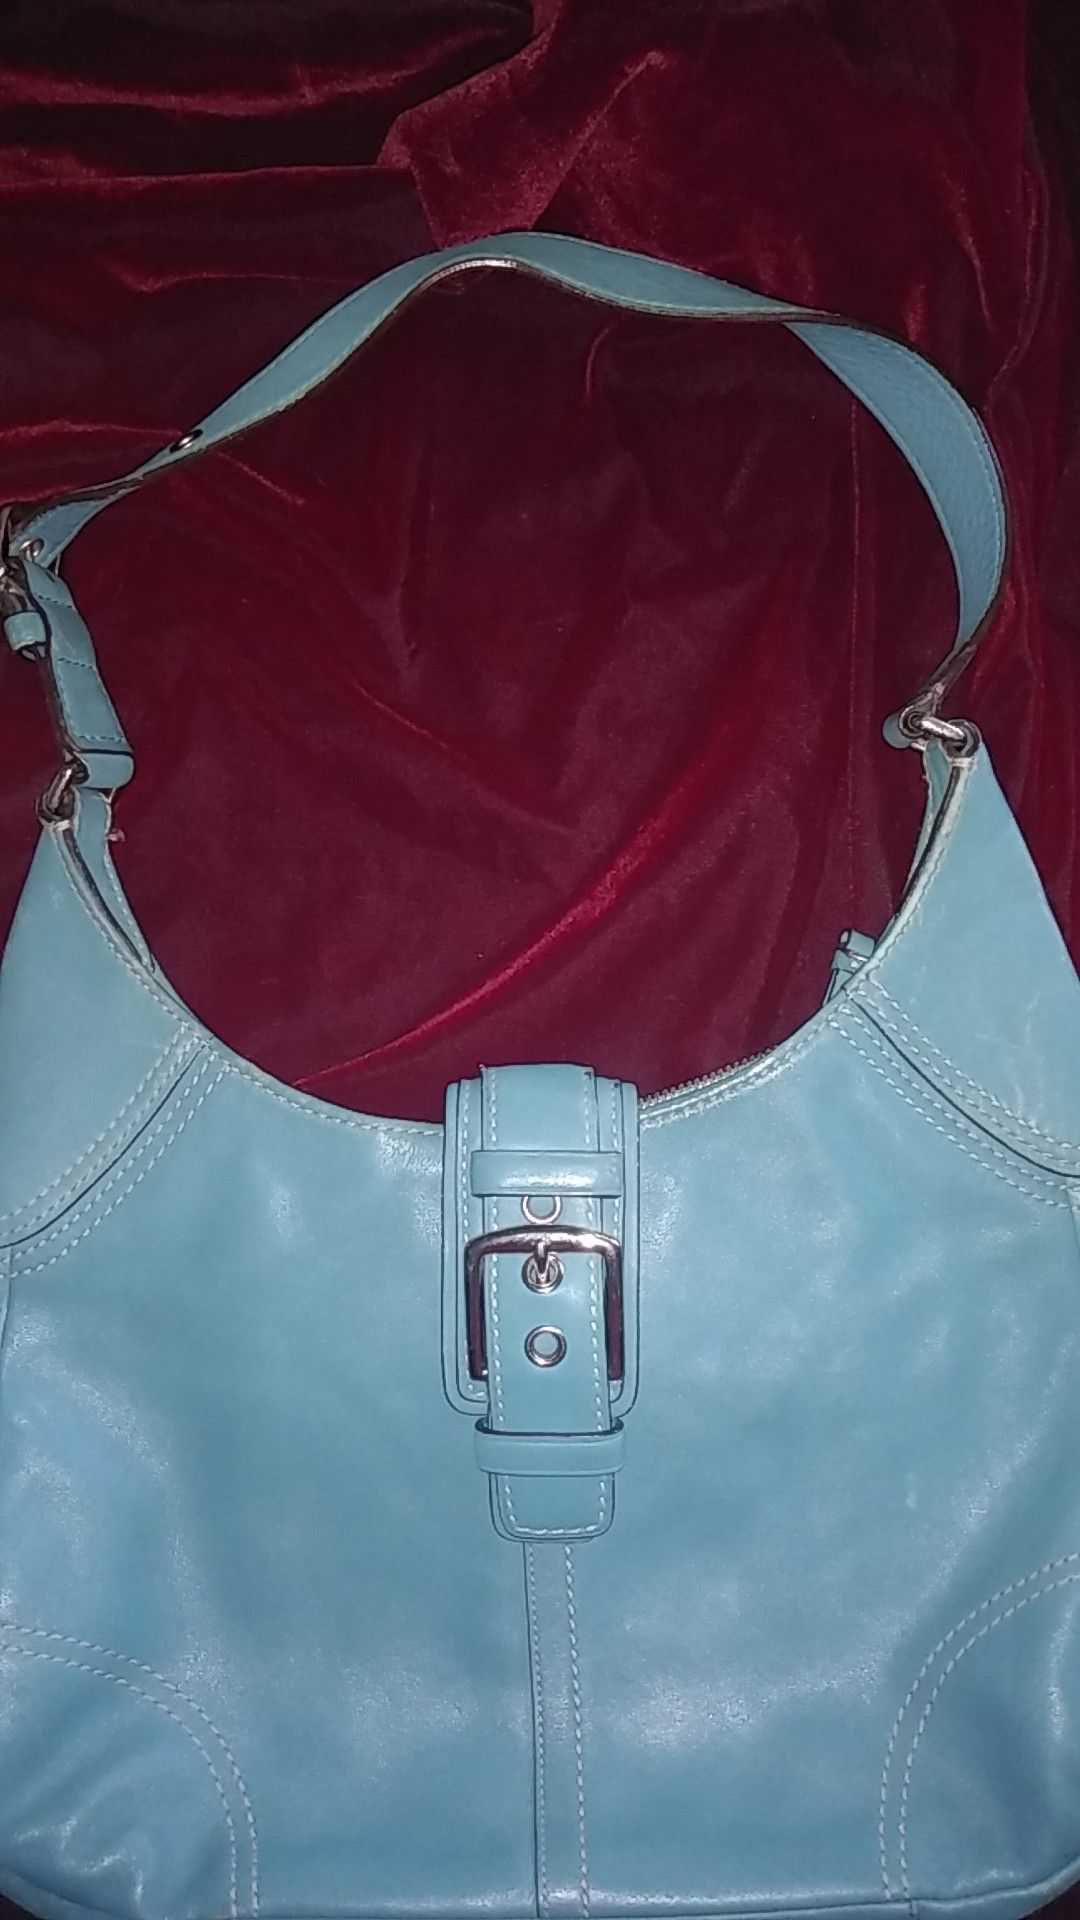 Coach teal/turquoise all leather shoulder hobo bag